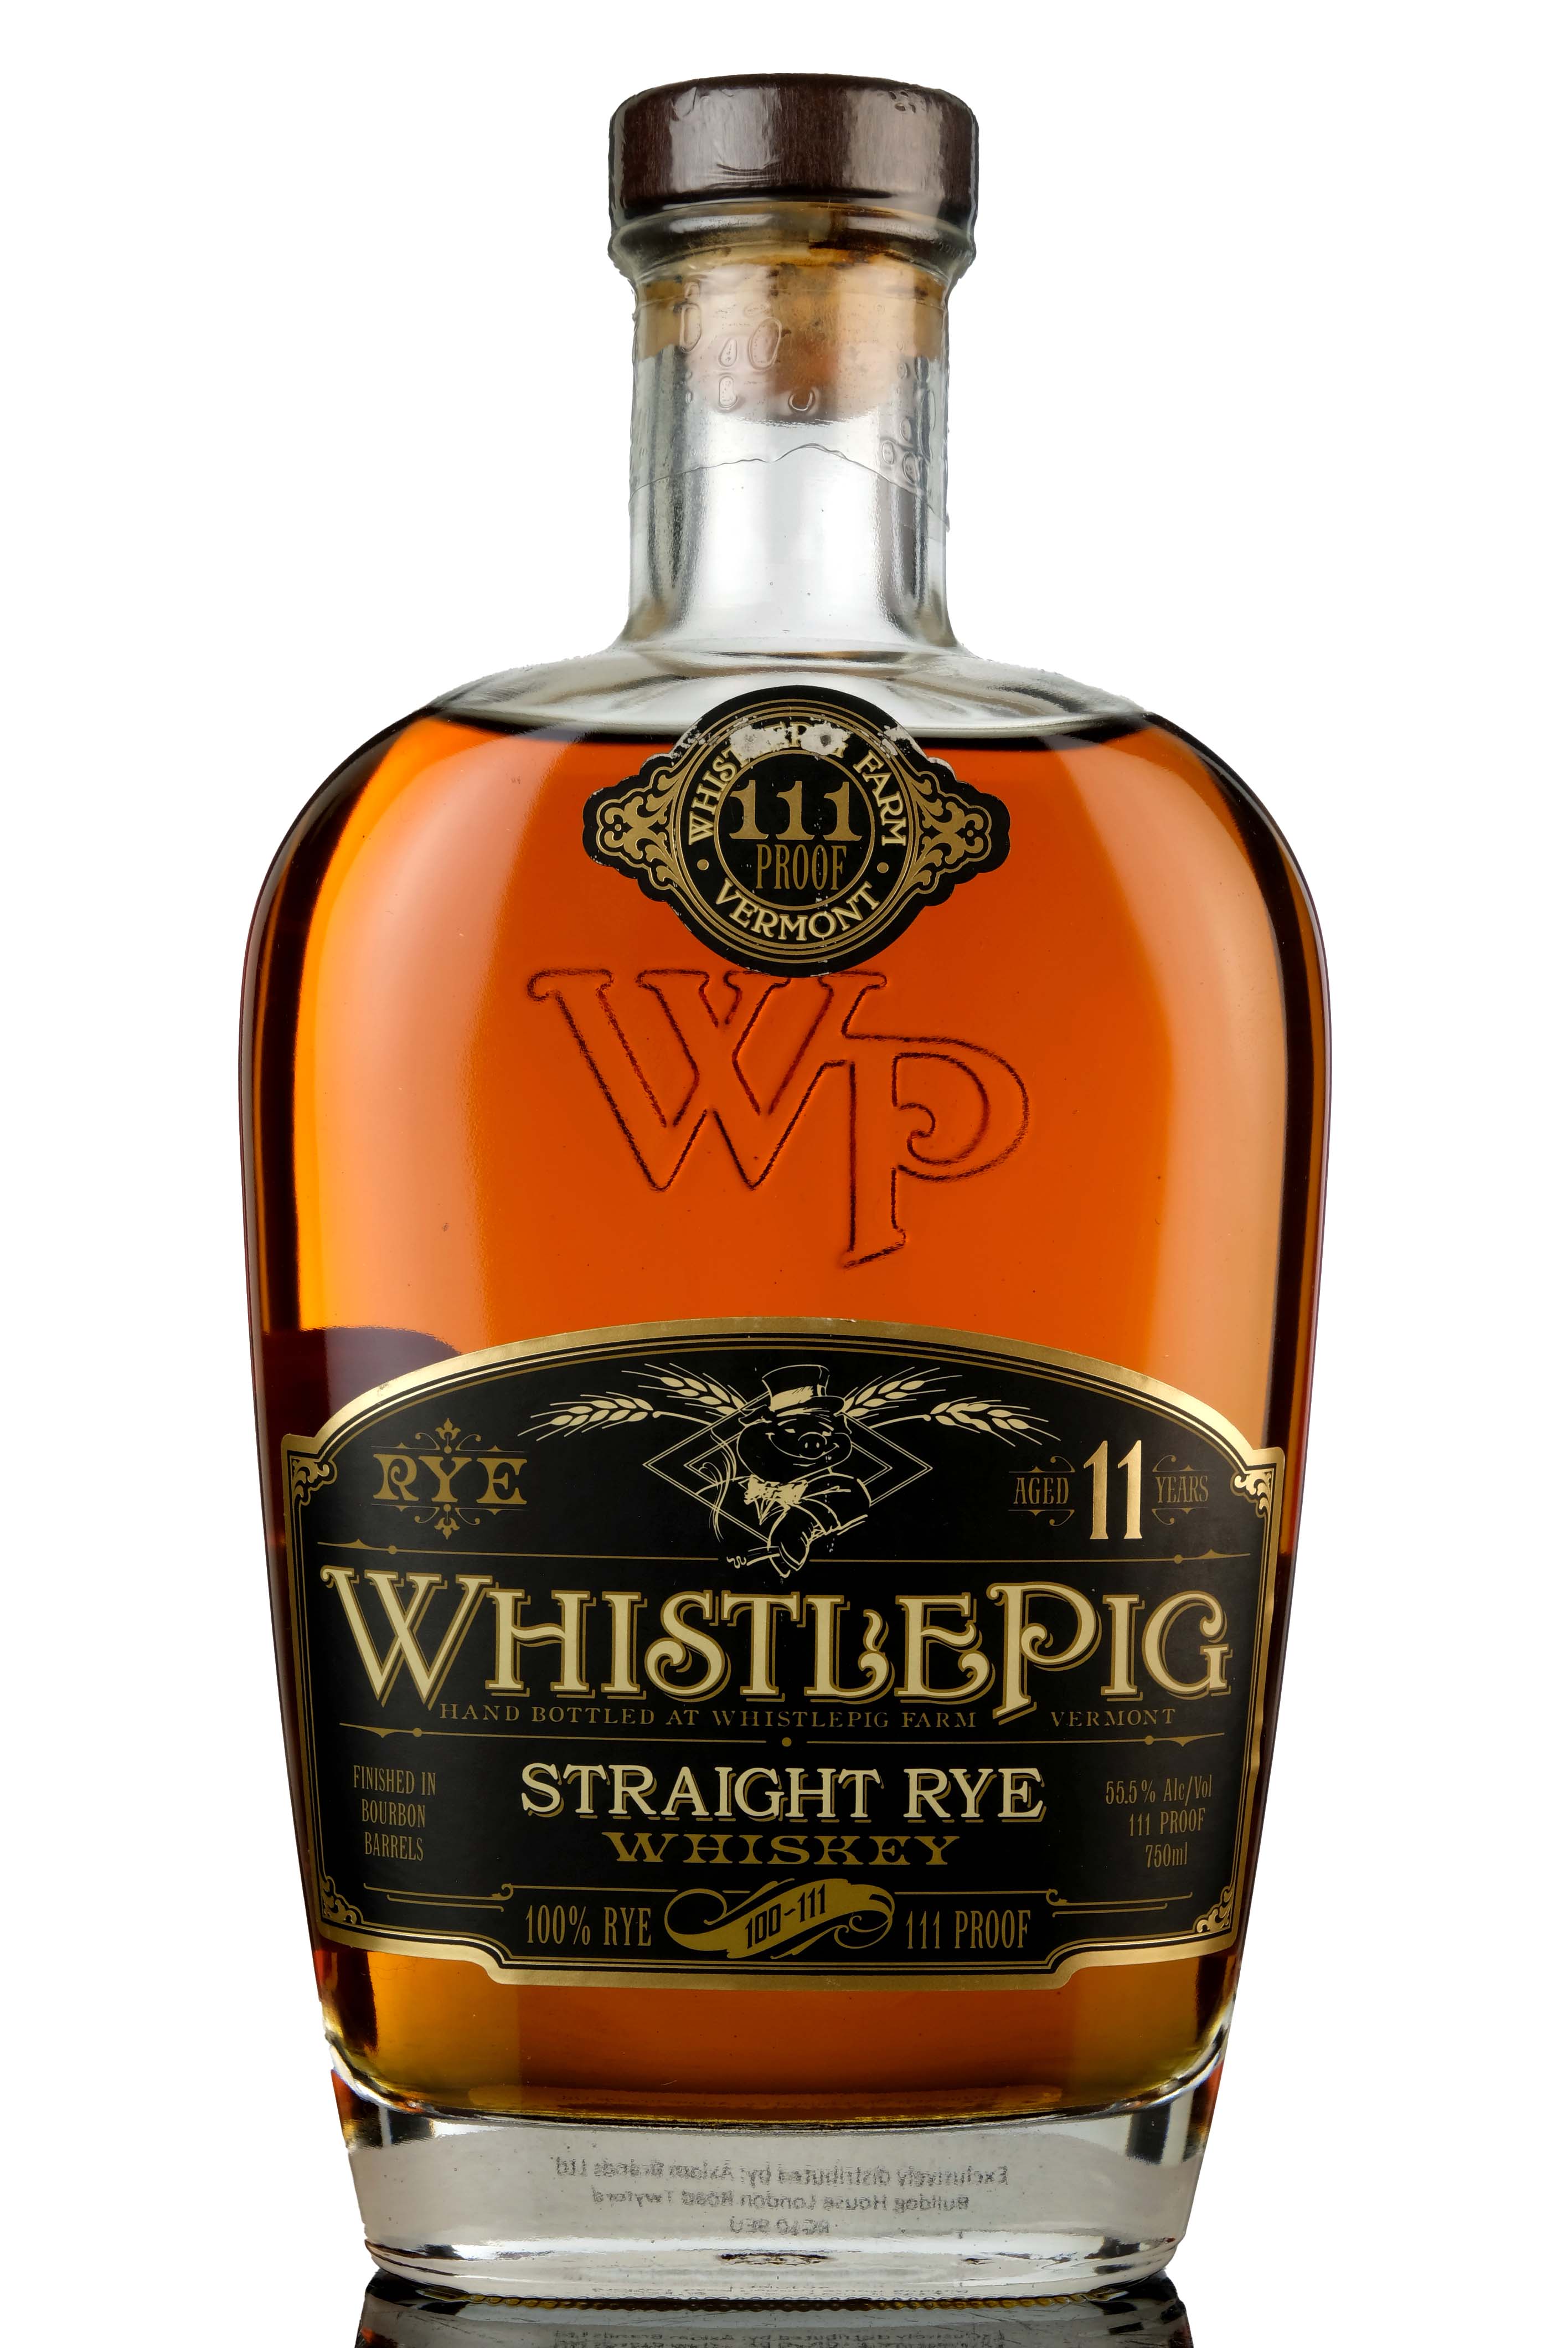 WhistlePig 11 Year Old - 111 Proof - Straight Rye Whiskey